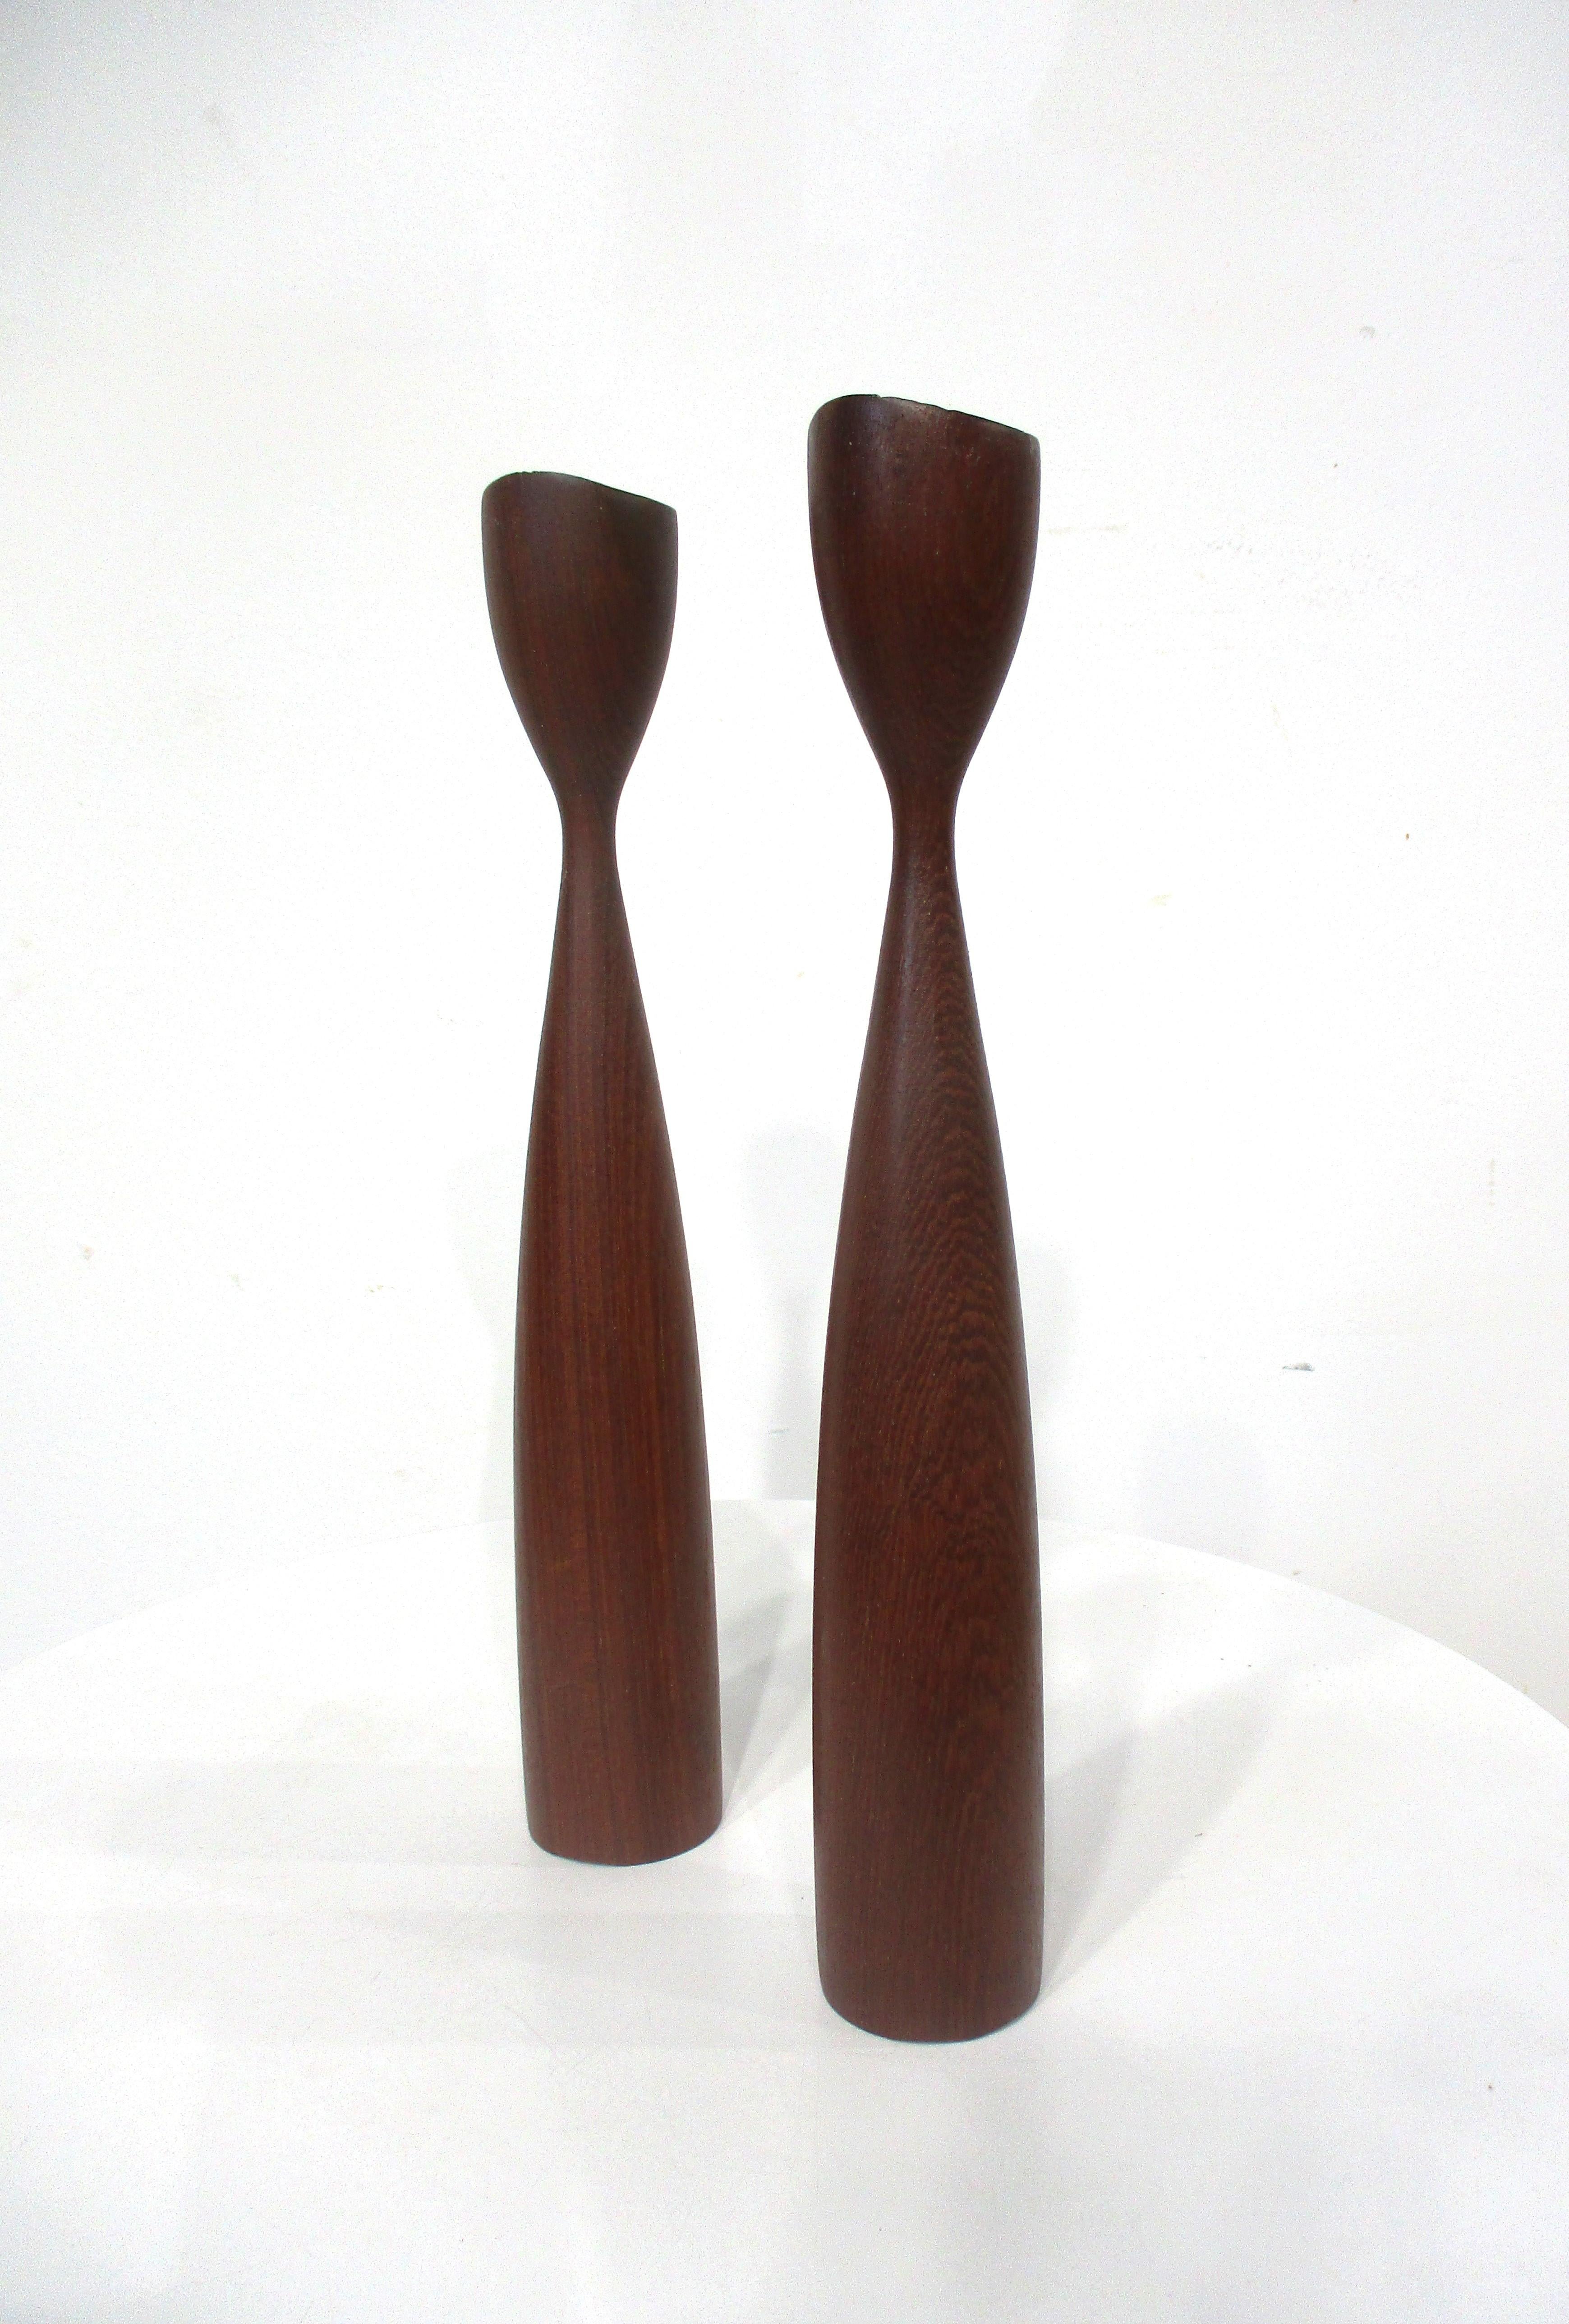 A pair of sculptural teak wood candlesticks with tall slender necks and heavy  weighted bases . Inside the candle area there are brass inserts for easy installing , removing and cleaning of the wax , retains the branded marks to the bottom of each